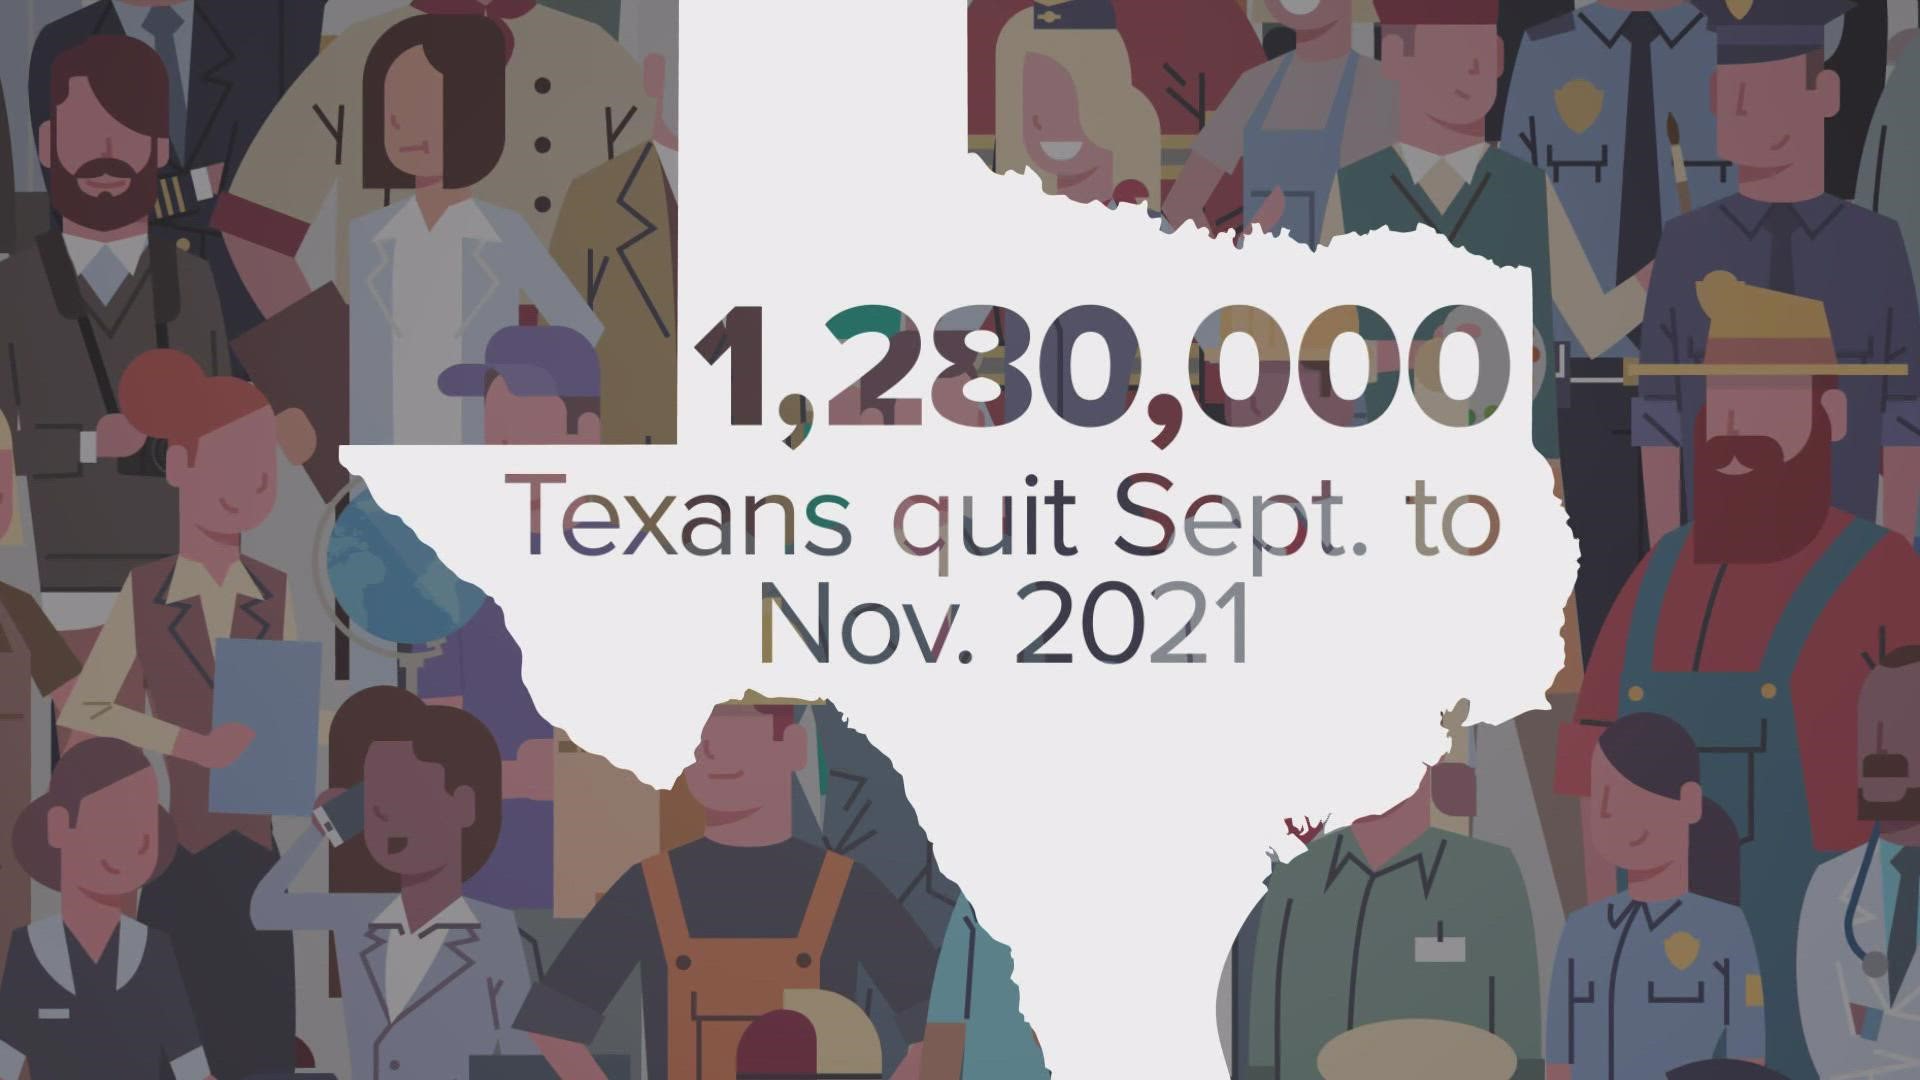 The number of hires in Texas has been staggering.